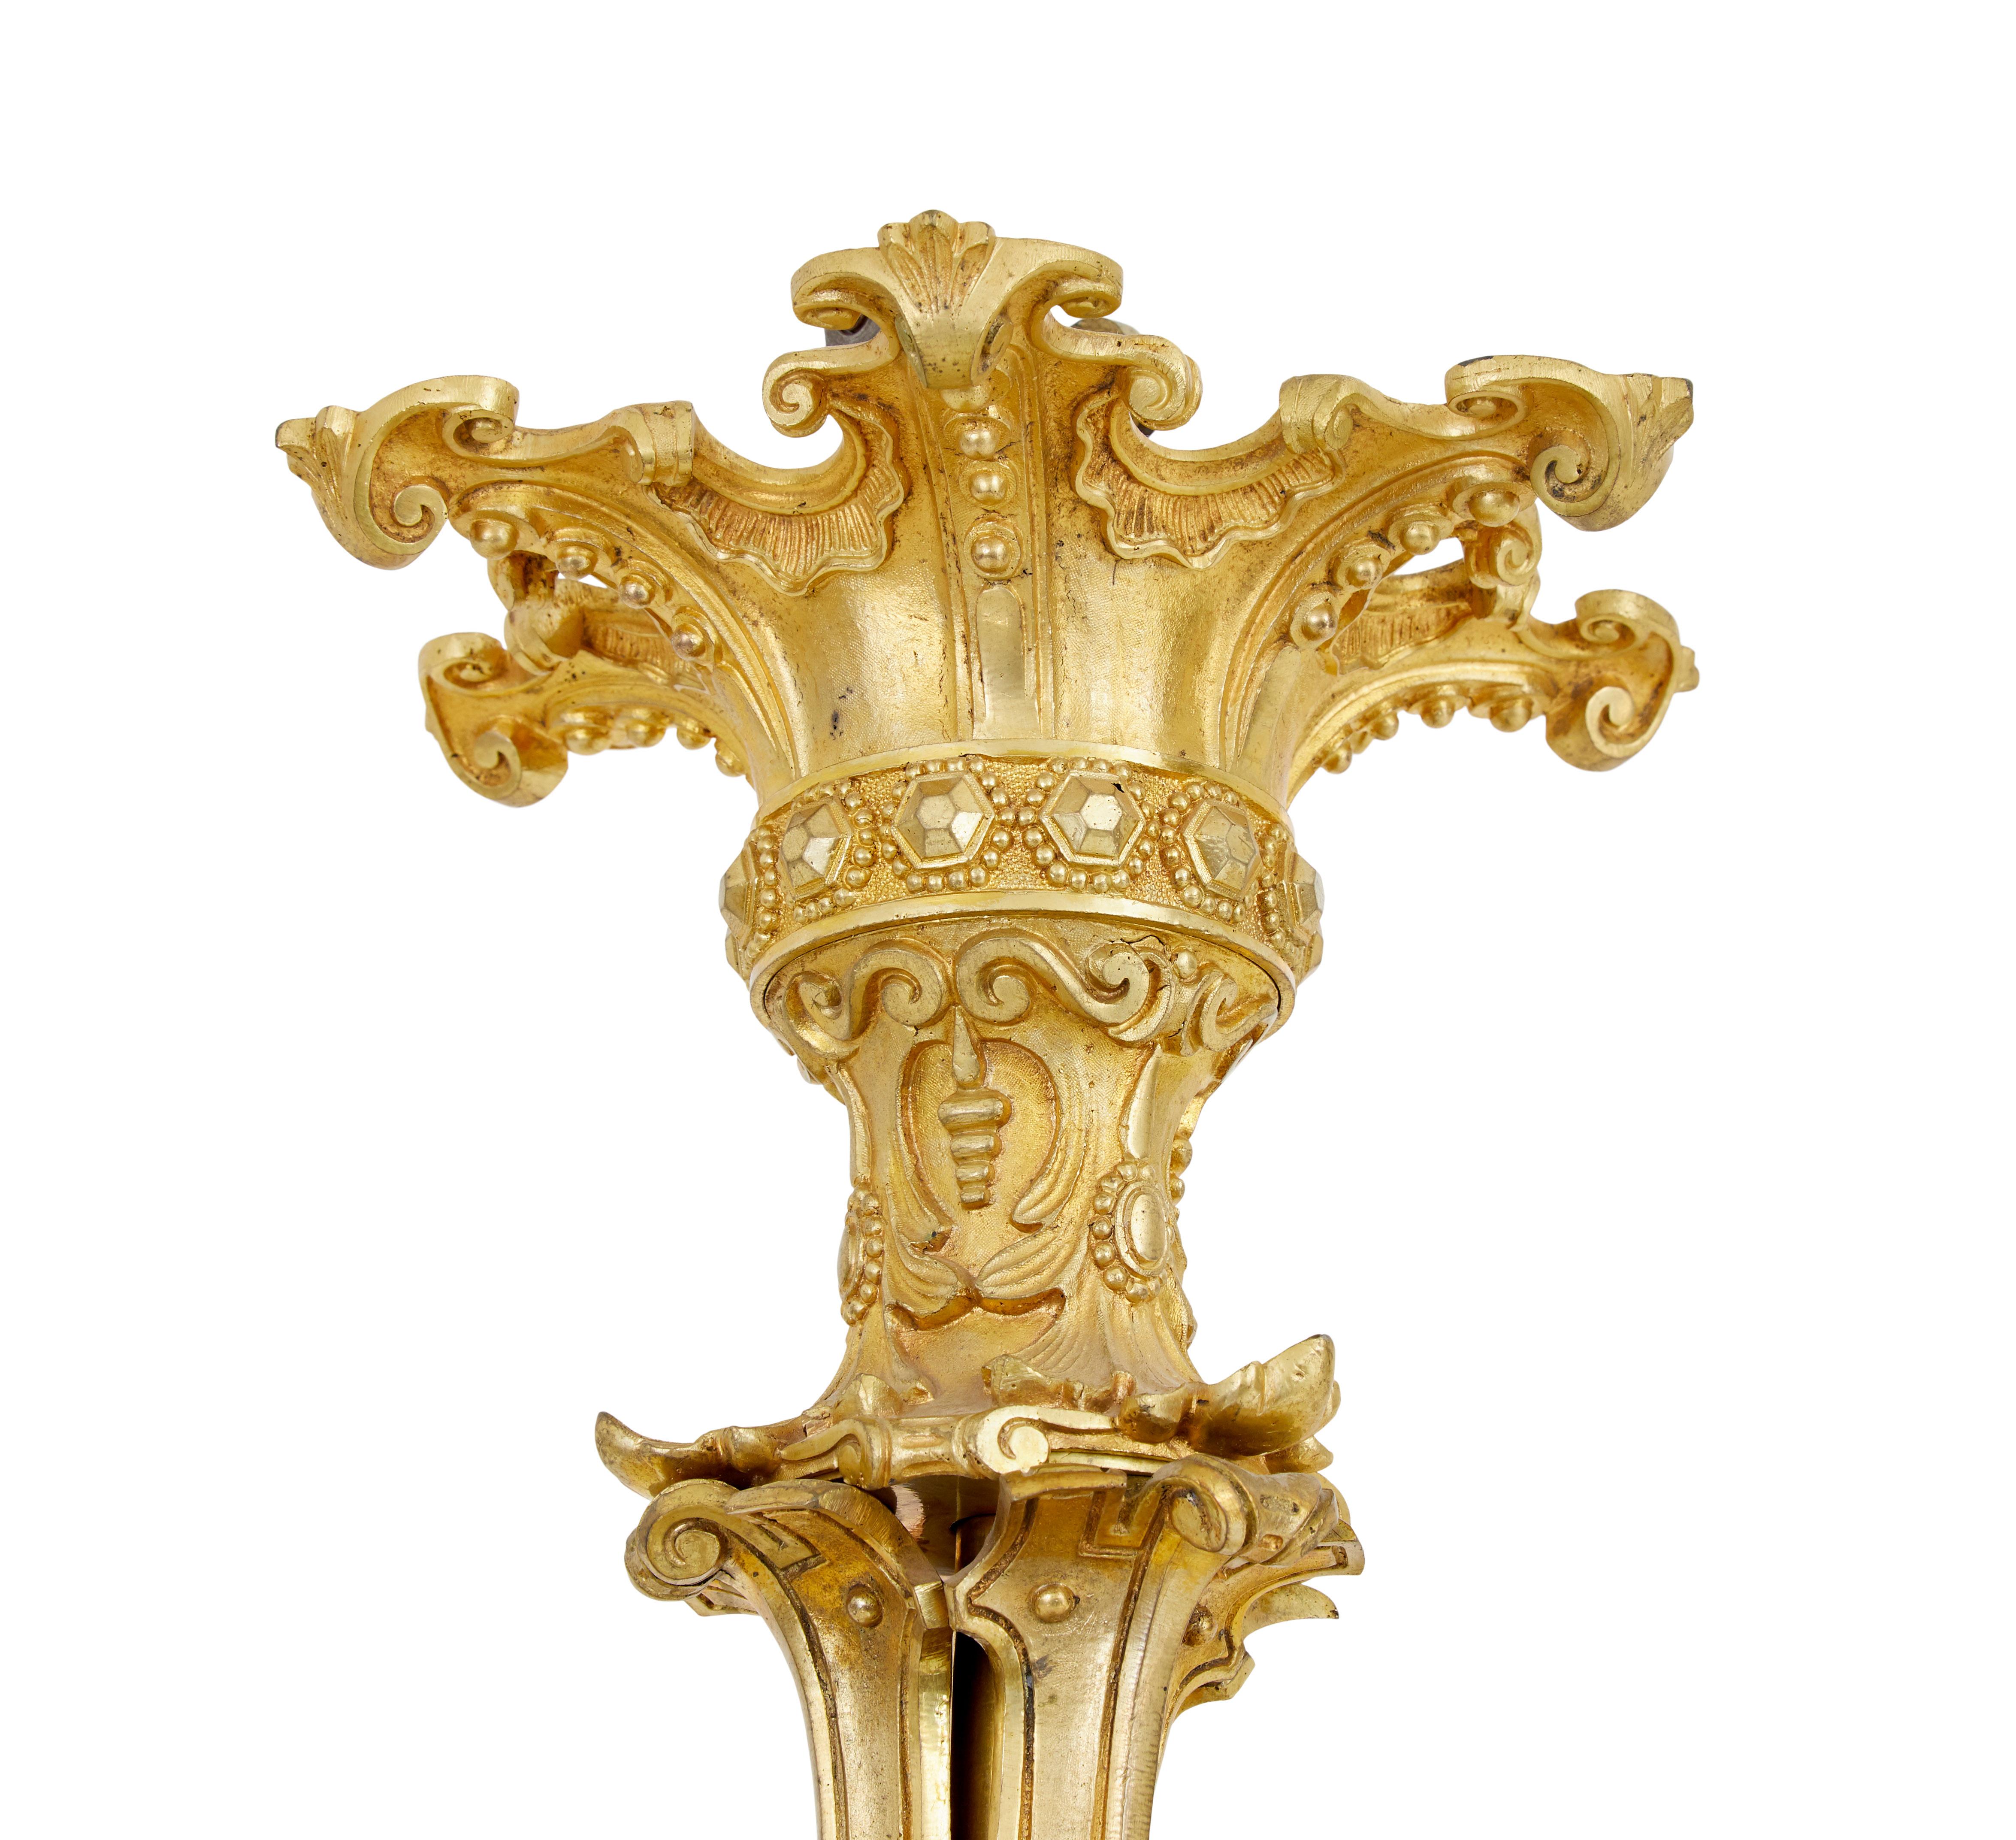 19th century french gilded ormolu 8-arm chandelier circa 1880.

Made in France using a technique called mercury gilding. 8 arms which hold 2 candles on each. Decorated with acanthus leaves and lions heads.

We have to stress this is of the finest